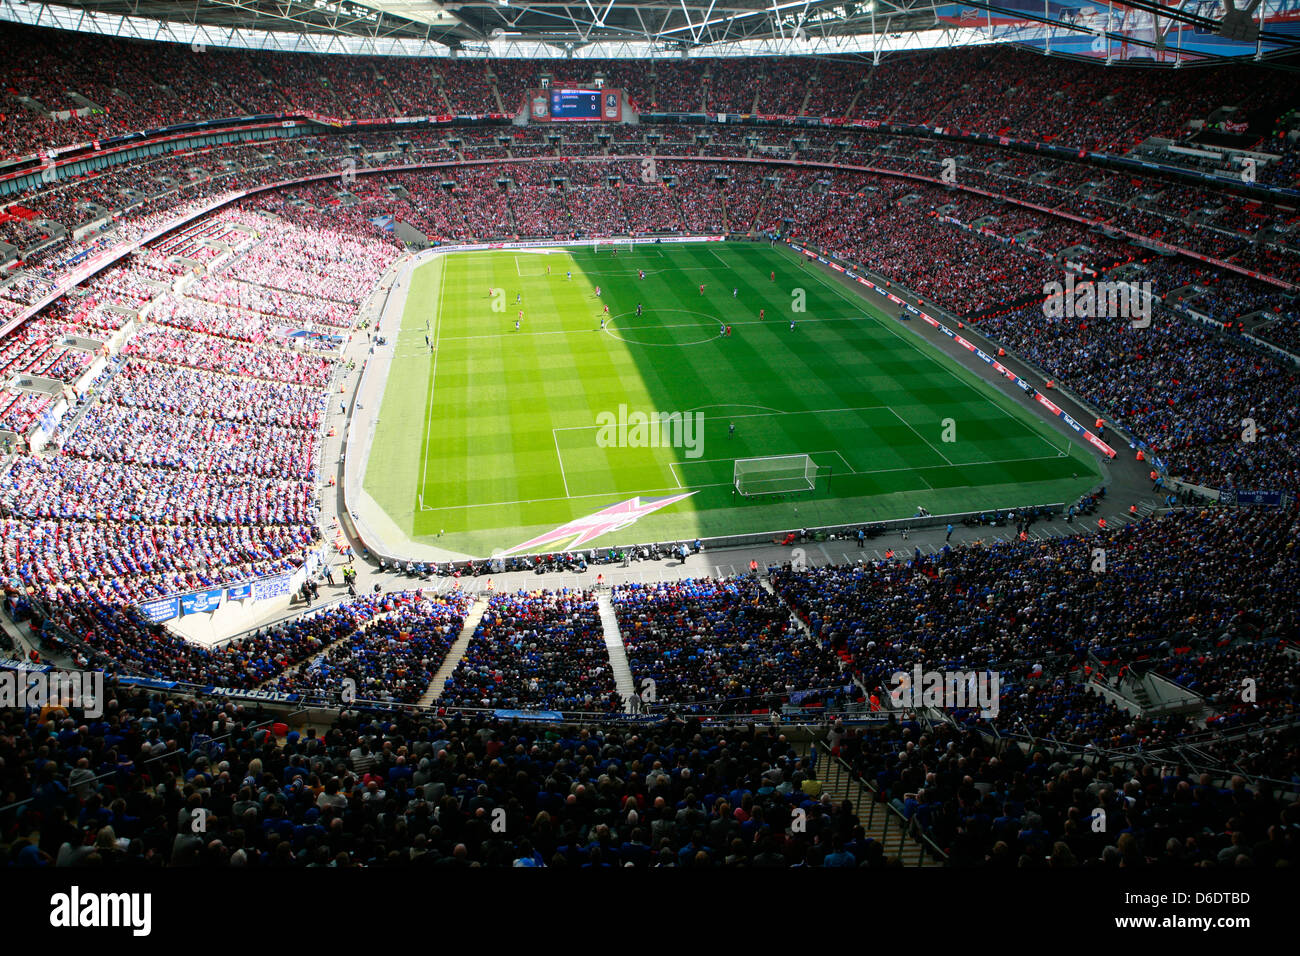 Wembley Stadium during a football soccer match between Liverpool and Everton Stock Photo